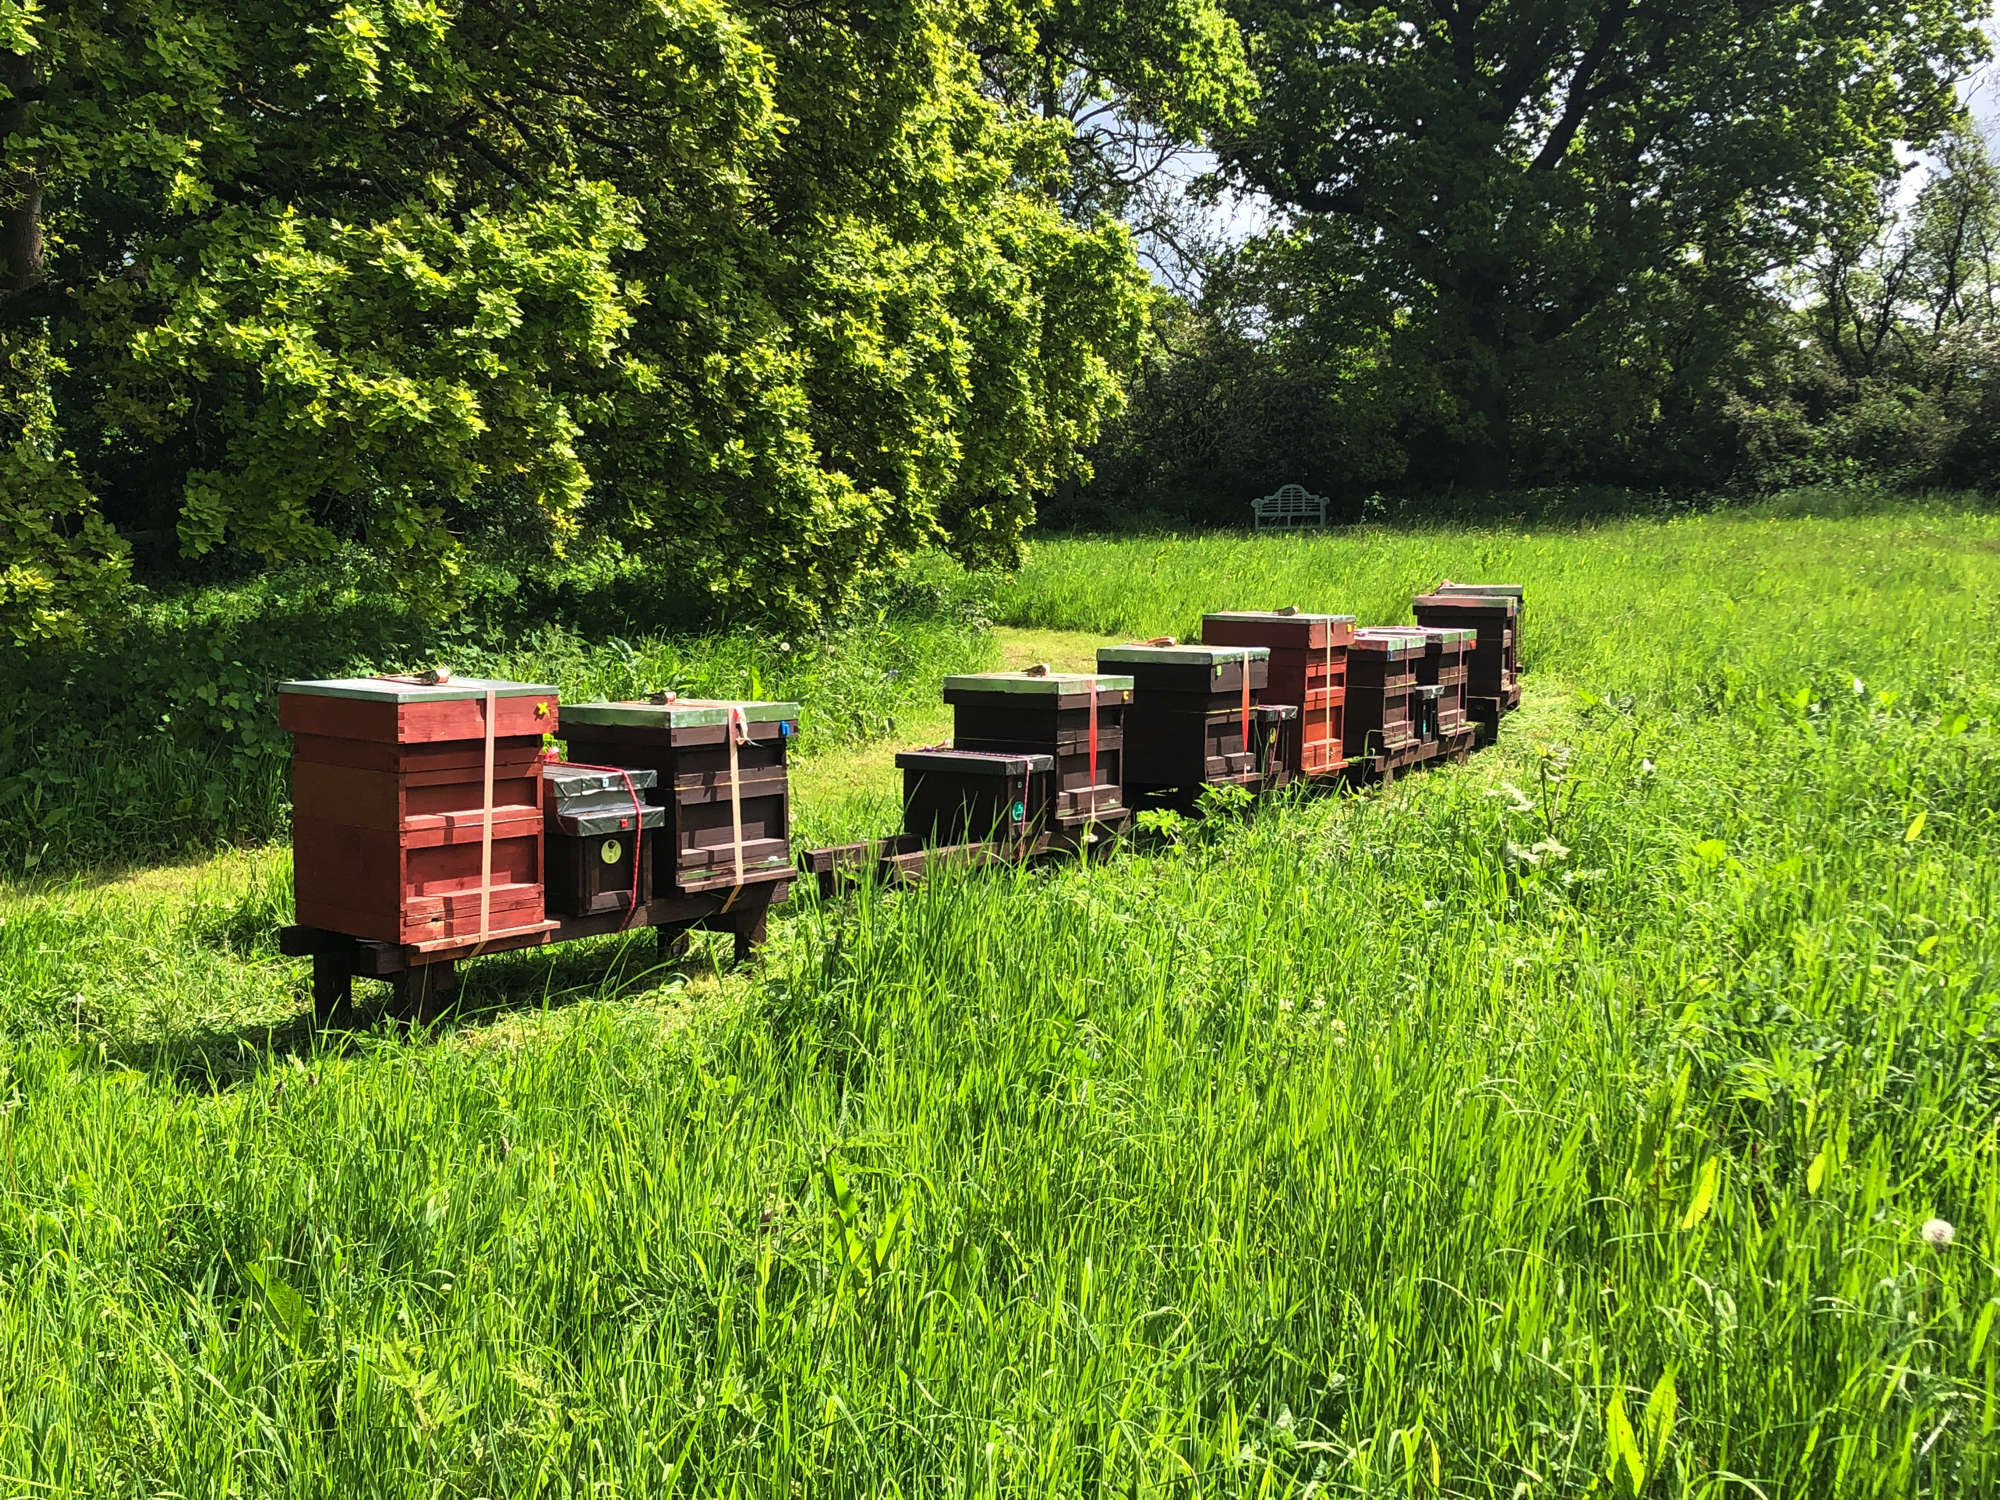 Hosting Bees – Would You Like To Help Honey Bees?